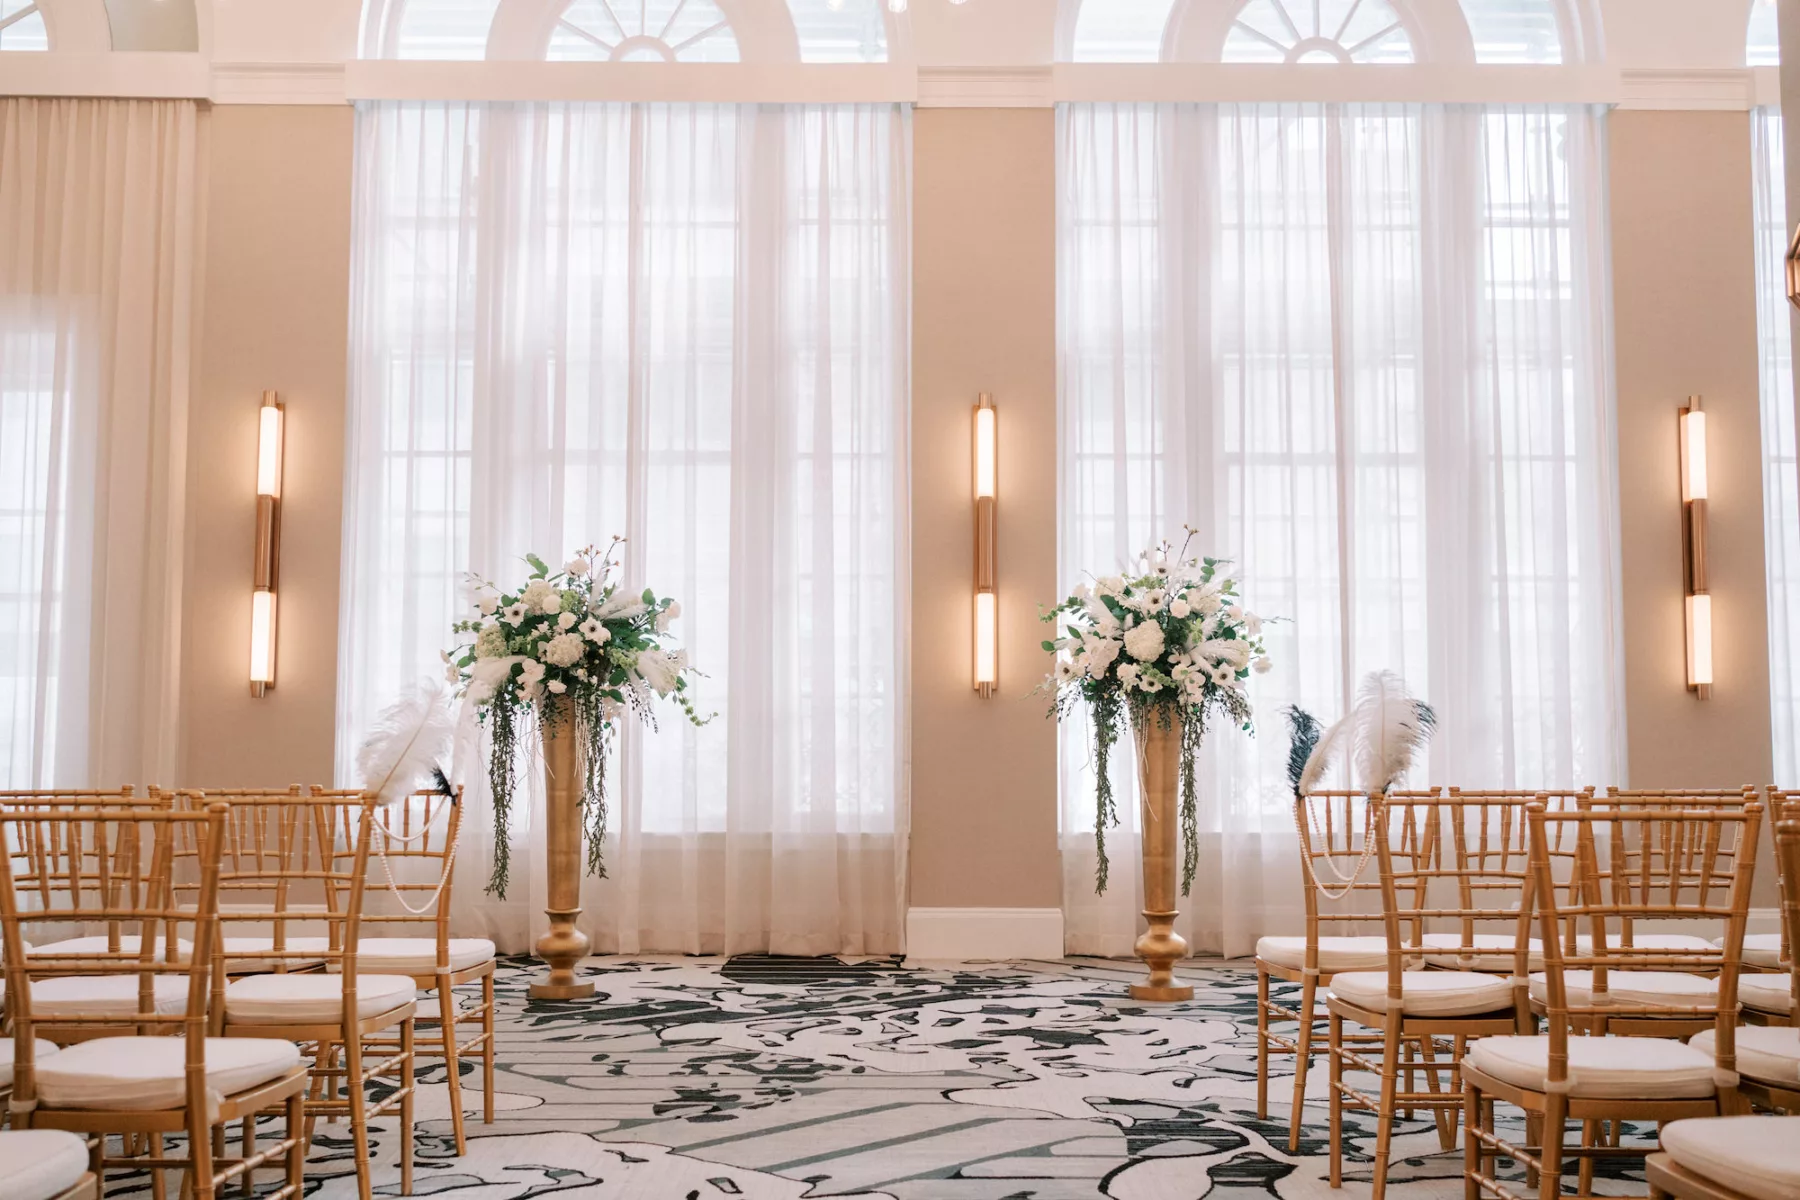 Great Gatsby Inspired Indoor Wedding Ceremony | White Anemone, Hydrangeas, Carnations, and Greenery Floral Altar Decor Ideas | Gold Chiavari Chairs | Tampa Bay Event Venue Hotel Flor | Planner Coastal Coordinating